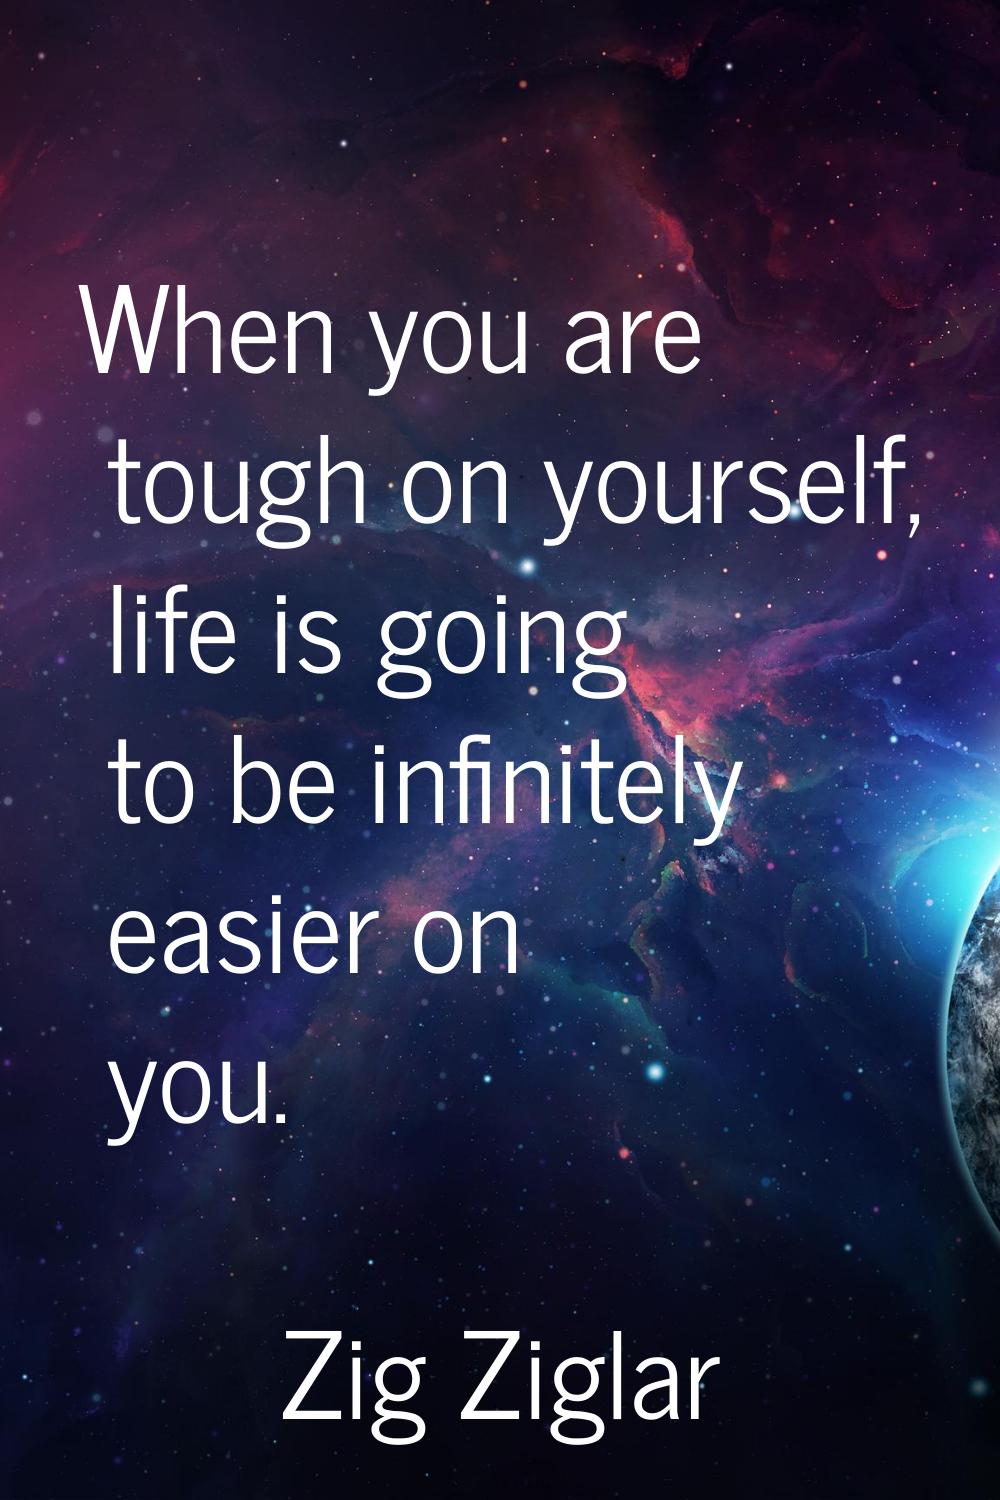 When you are tough on yourself, life is going to be infinitely easier on you.